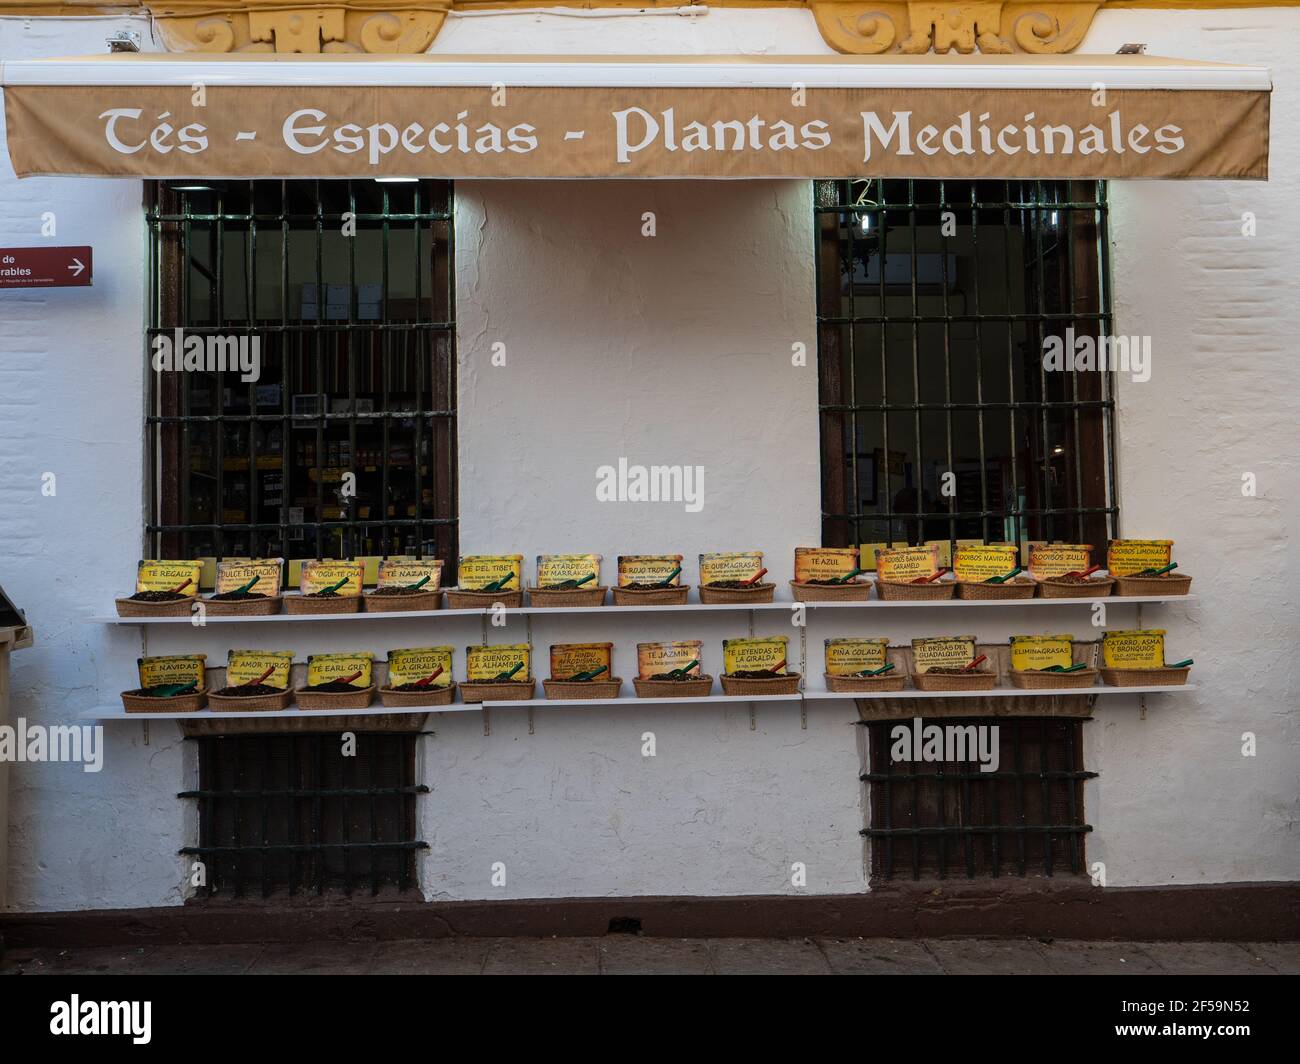 A shop frontage with a display of herbal teas and medicinal products Seville Spain Stock Photo